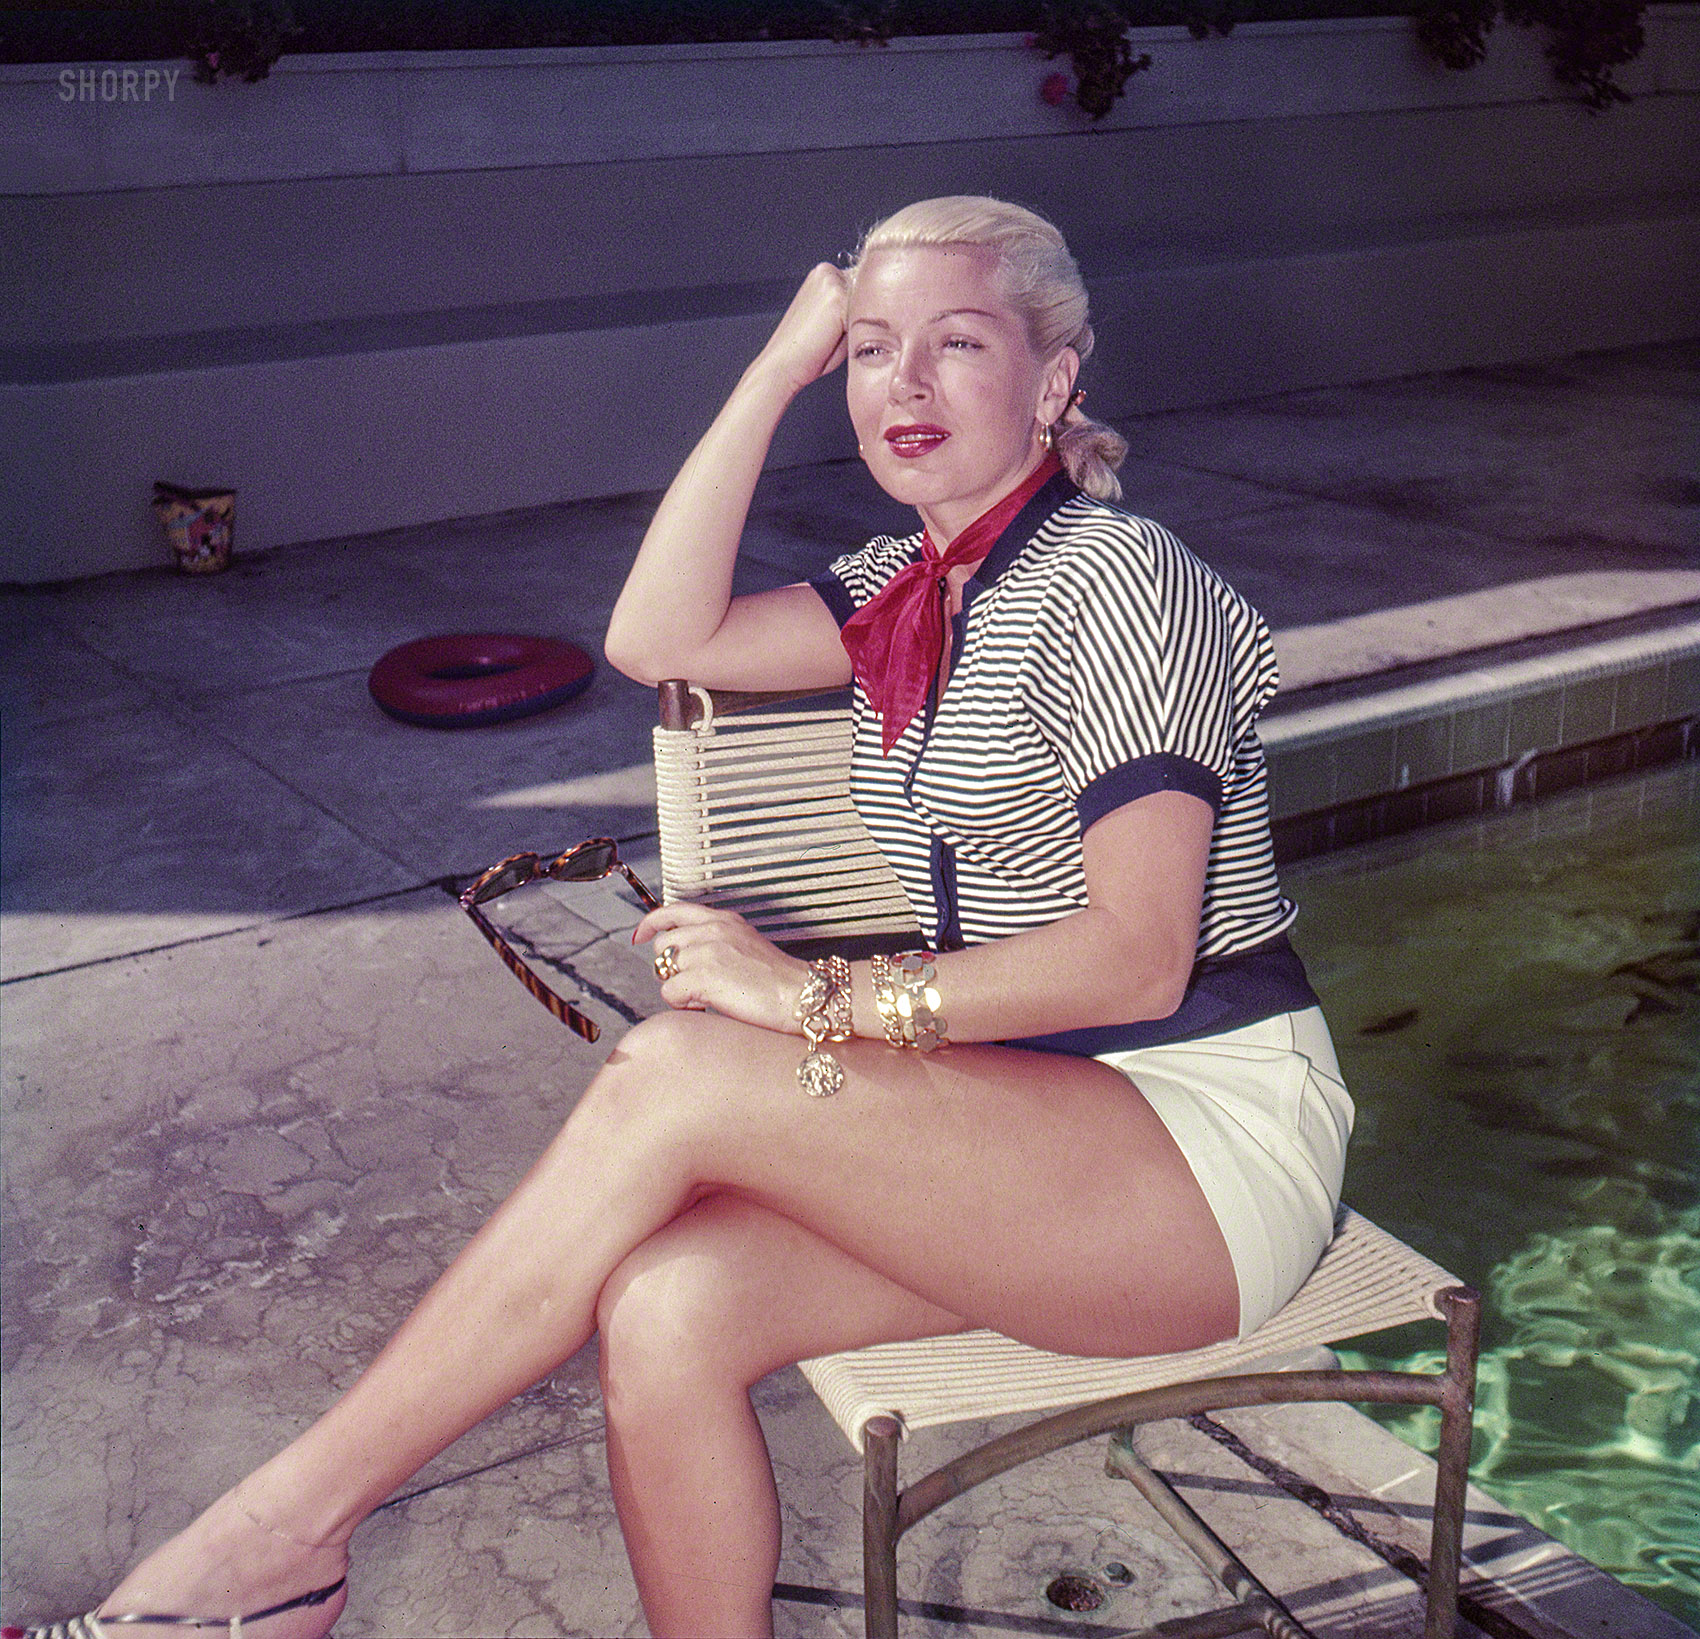 1951. Santa Barbara, California. "Lana Turner by pool at the Coral Casino." Color transparency by Earl Theisen for Look magazine. View full size.